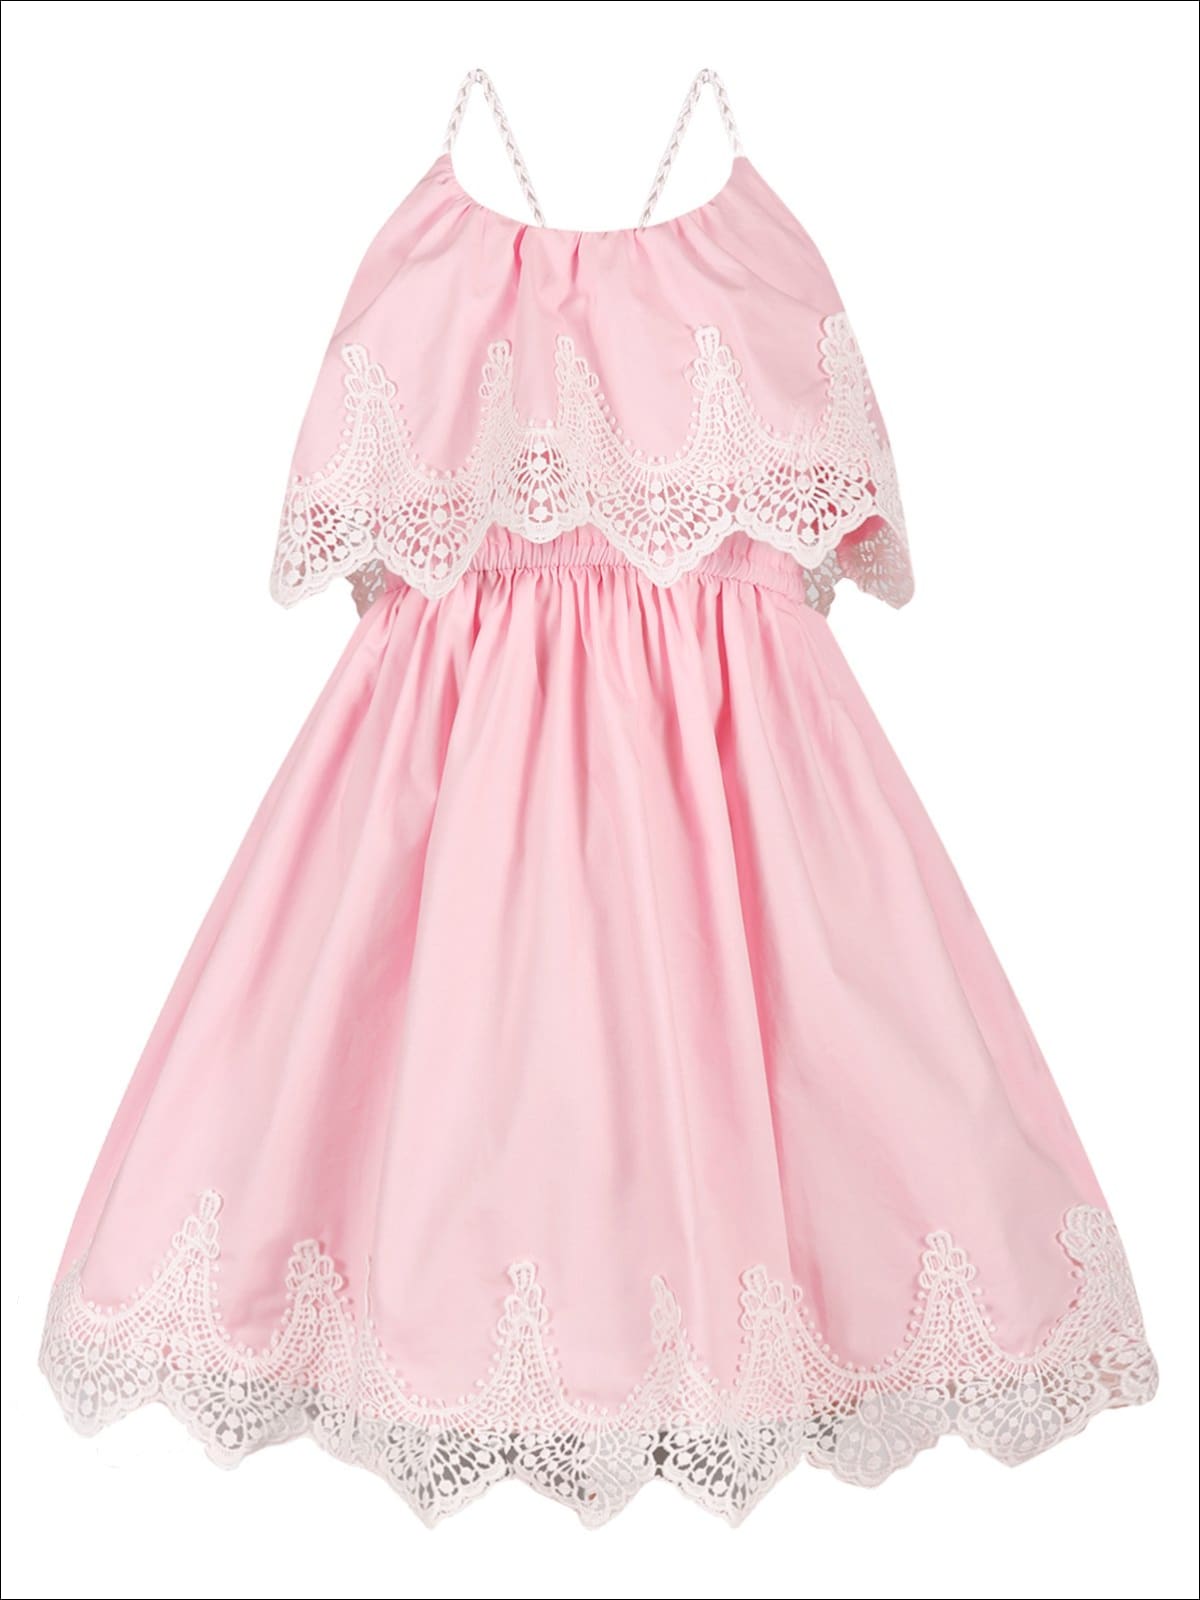 Girls Ruffle Layer Lace Racer Back Dress - Pink / 2T/3T - Girls Spring Casual Dress